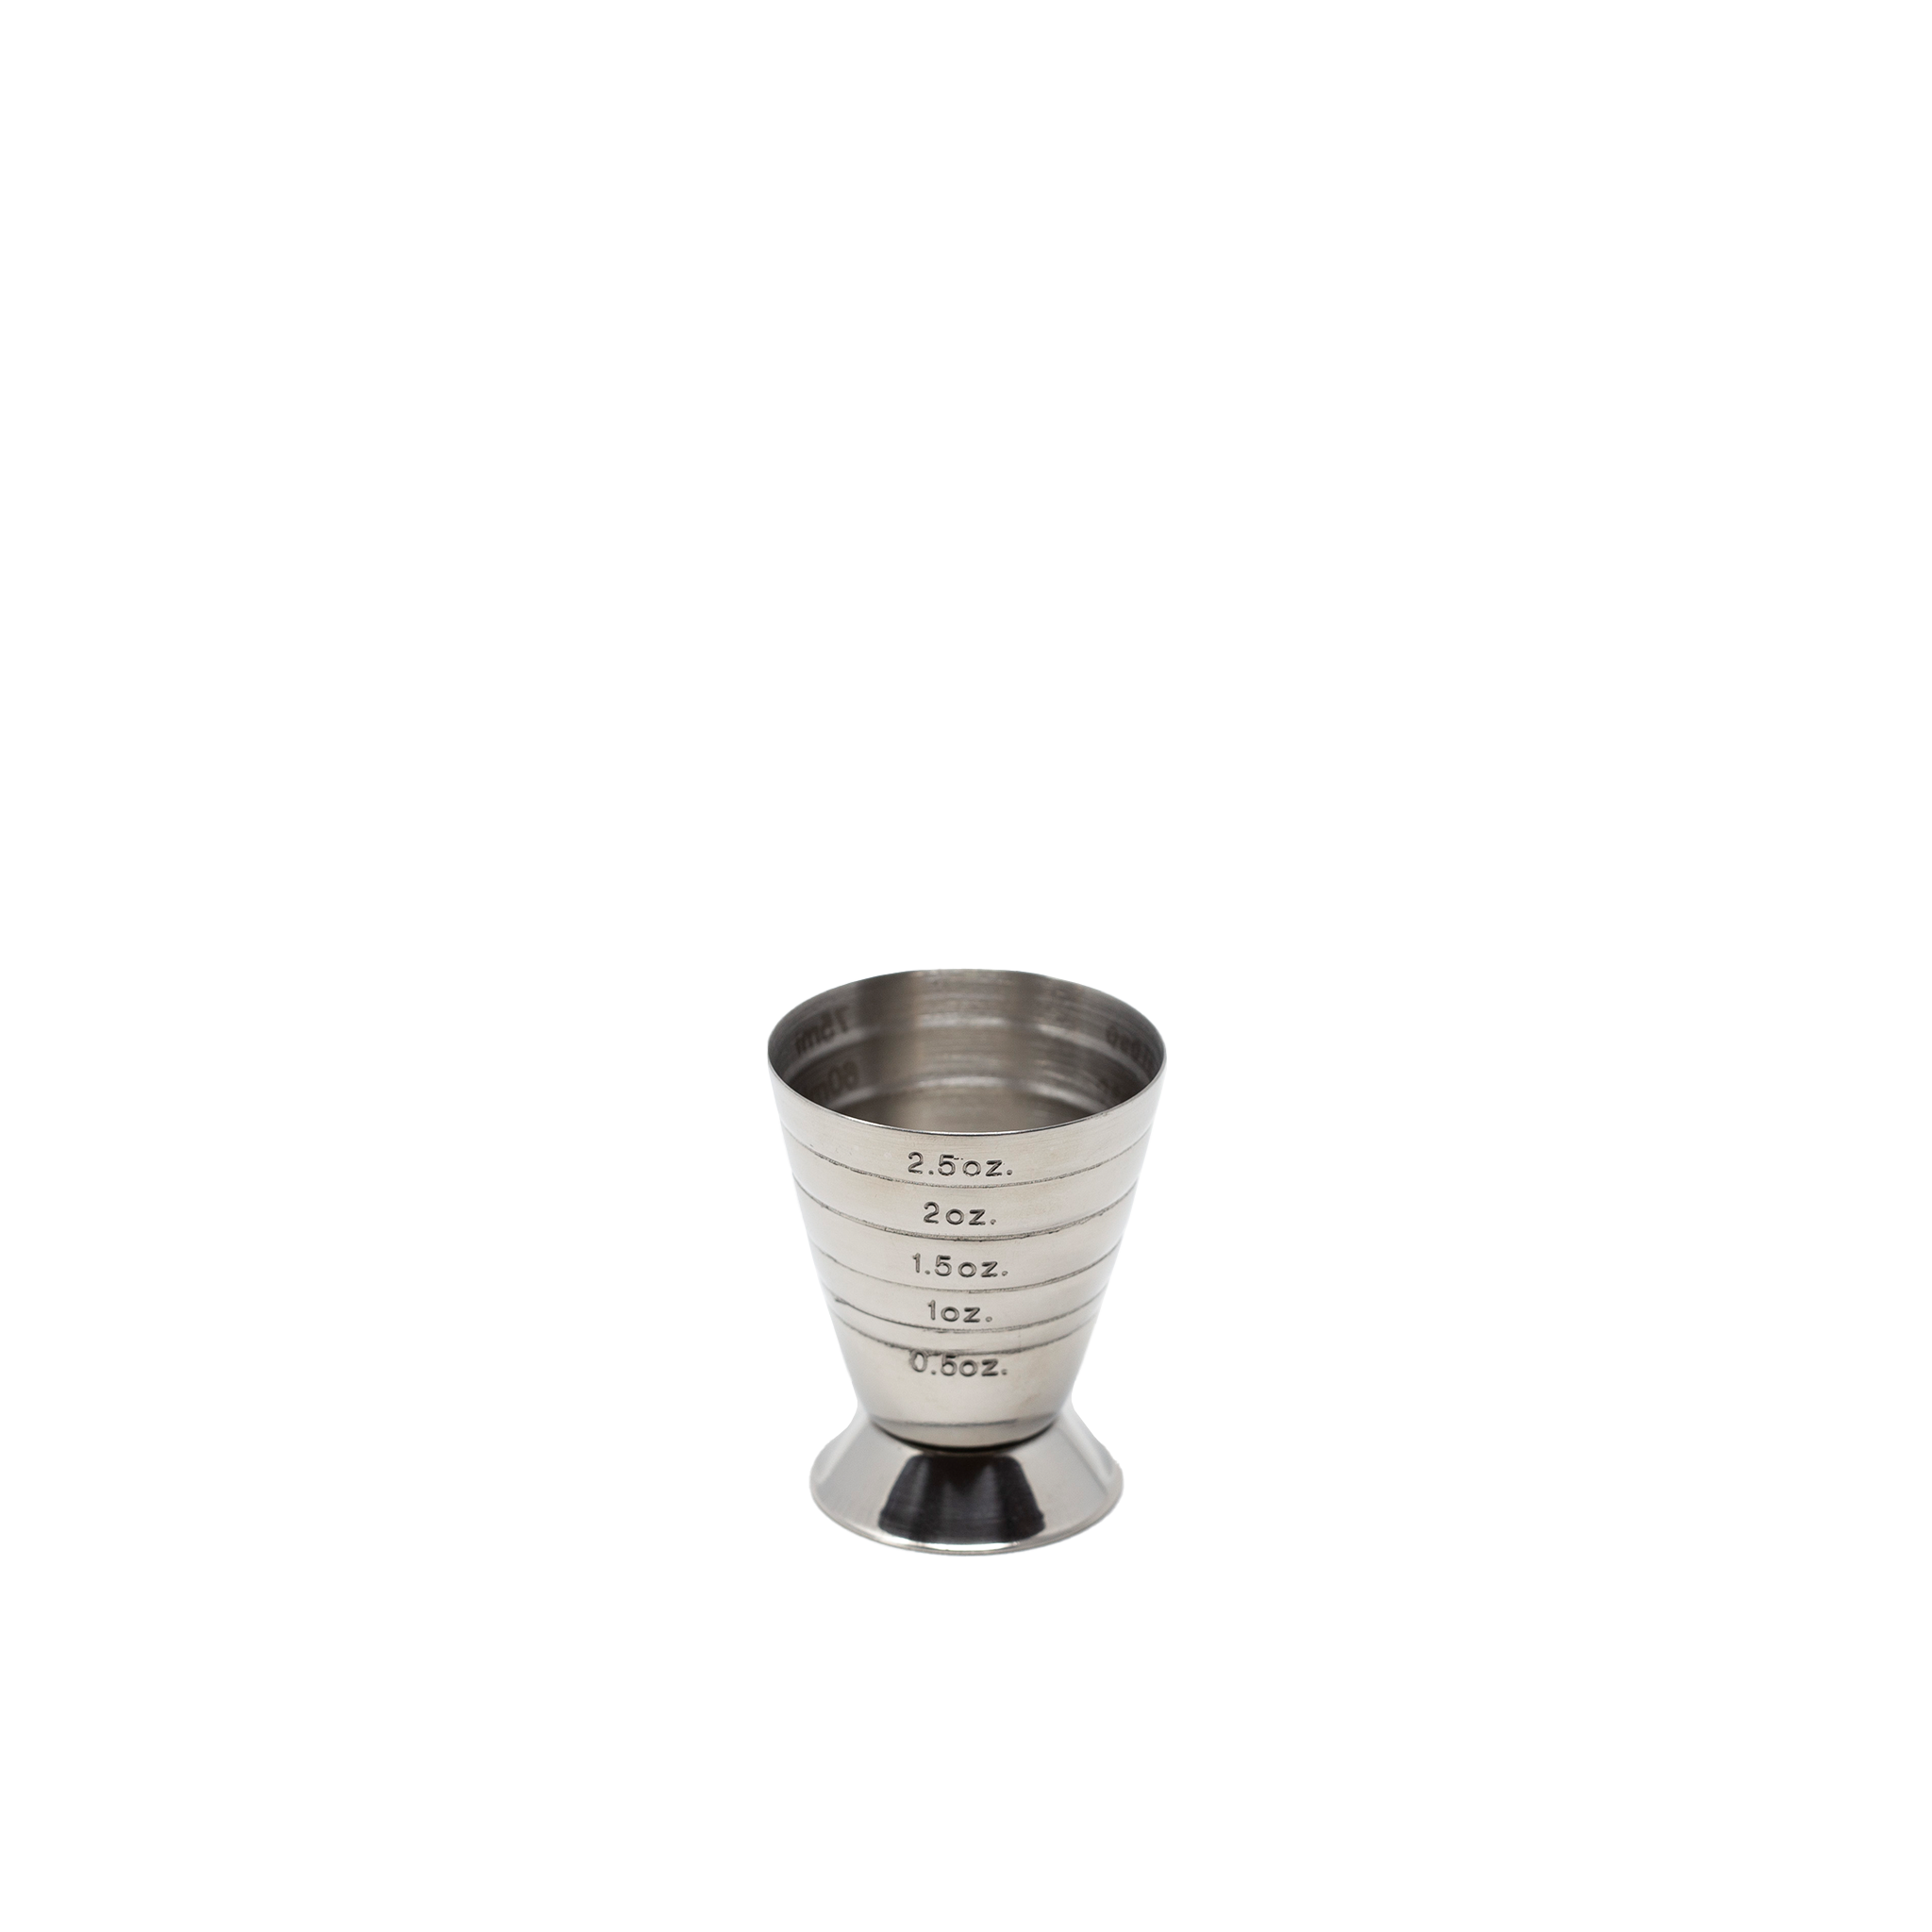 Stainless Steel 2.5oz Cocktail Jigger. Measurements in oz and ml